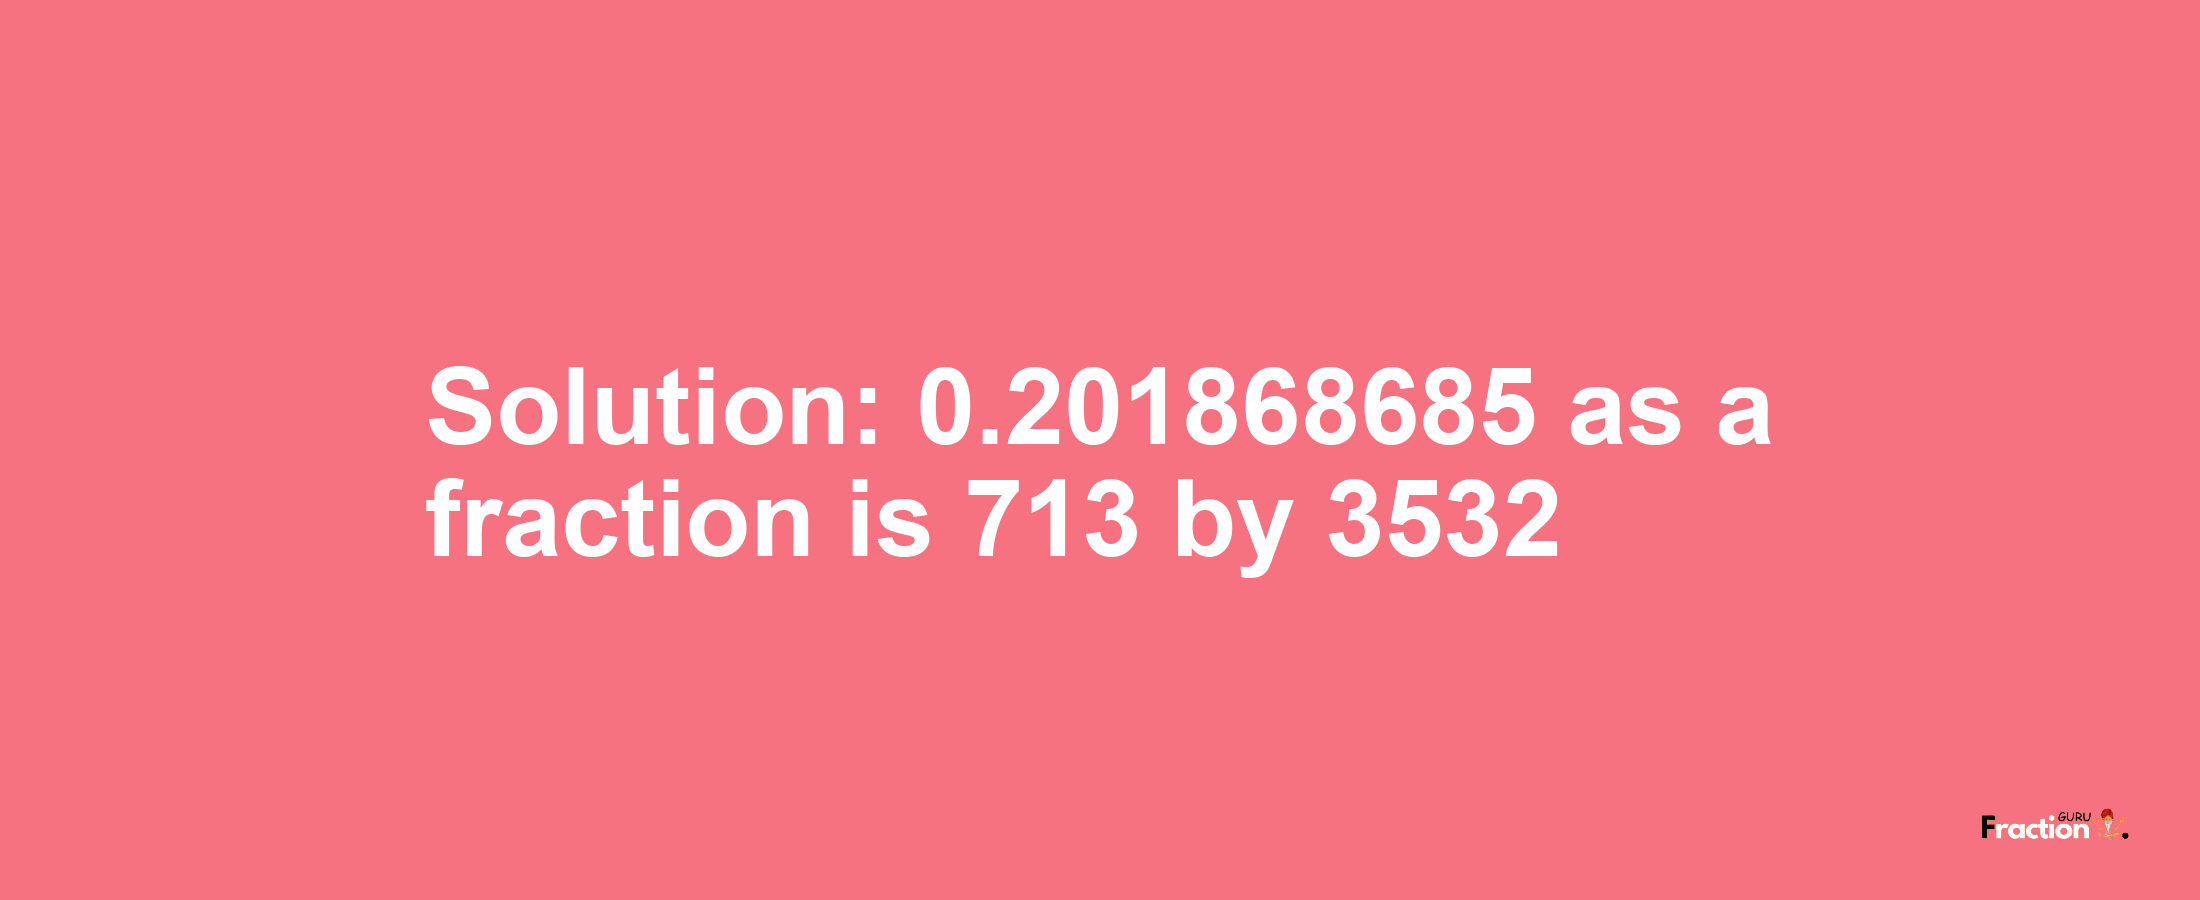 Solution:0.201868685 as a fraction is 713/3532